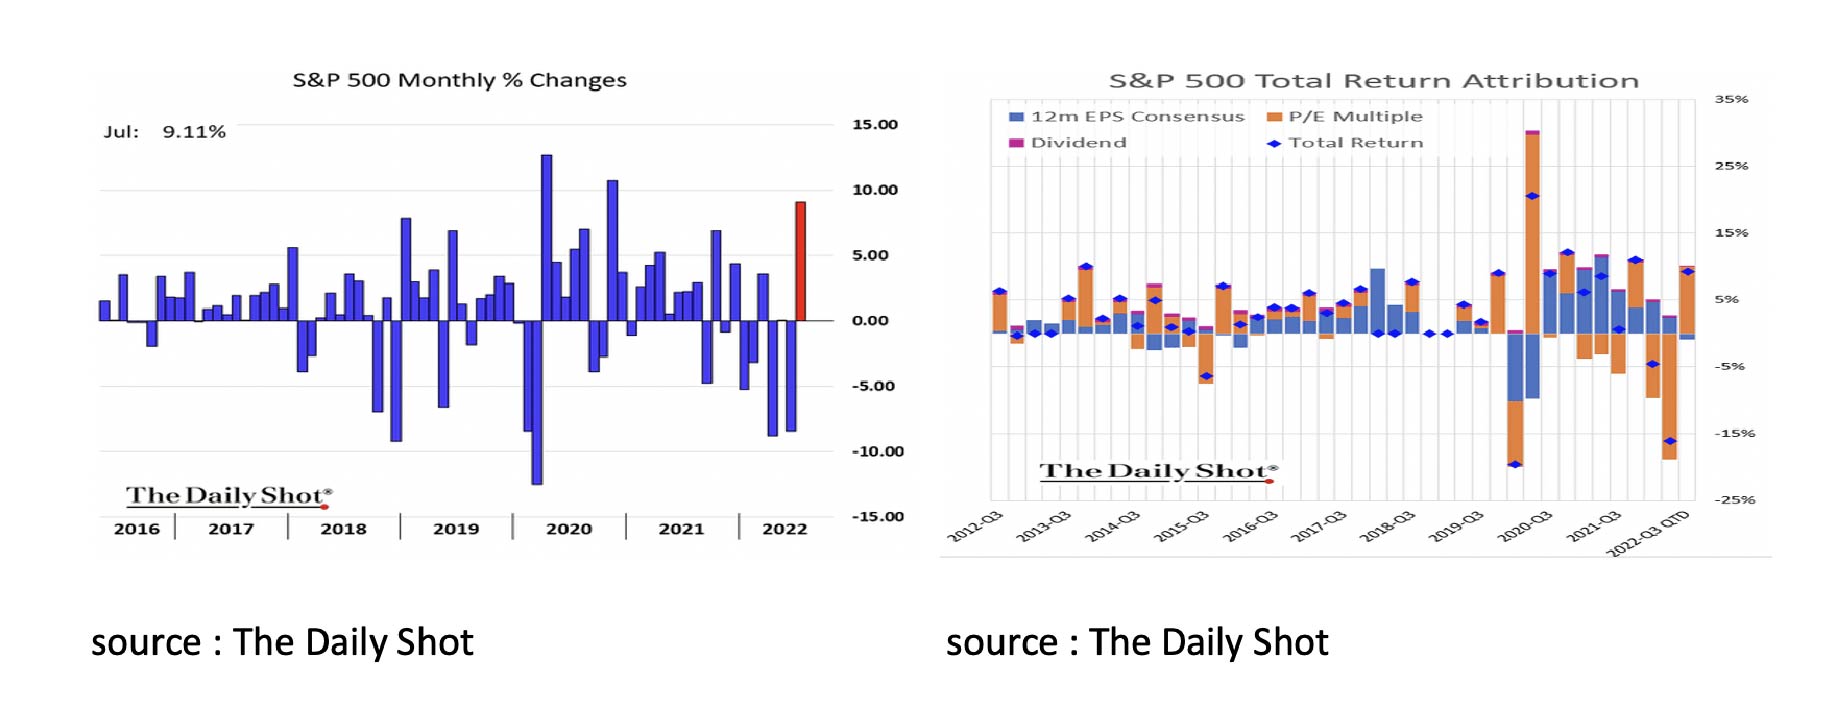 S&P 500 monthly changes